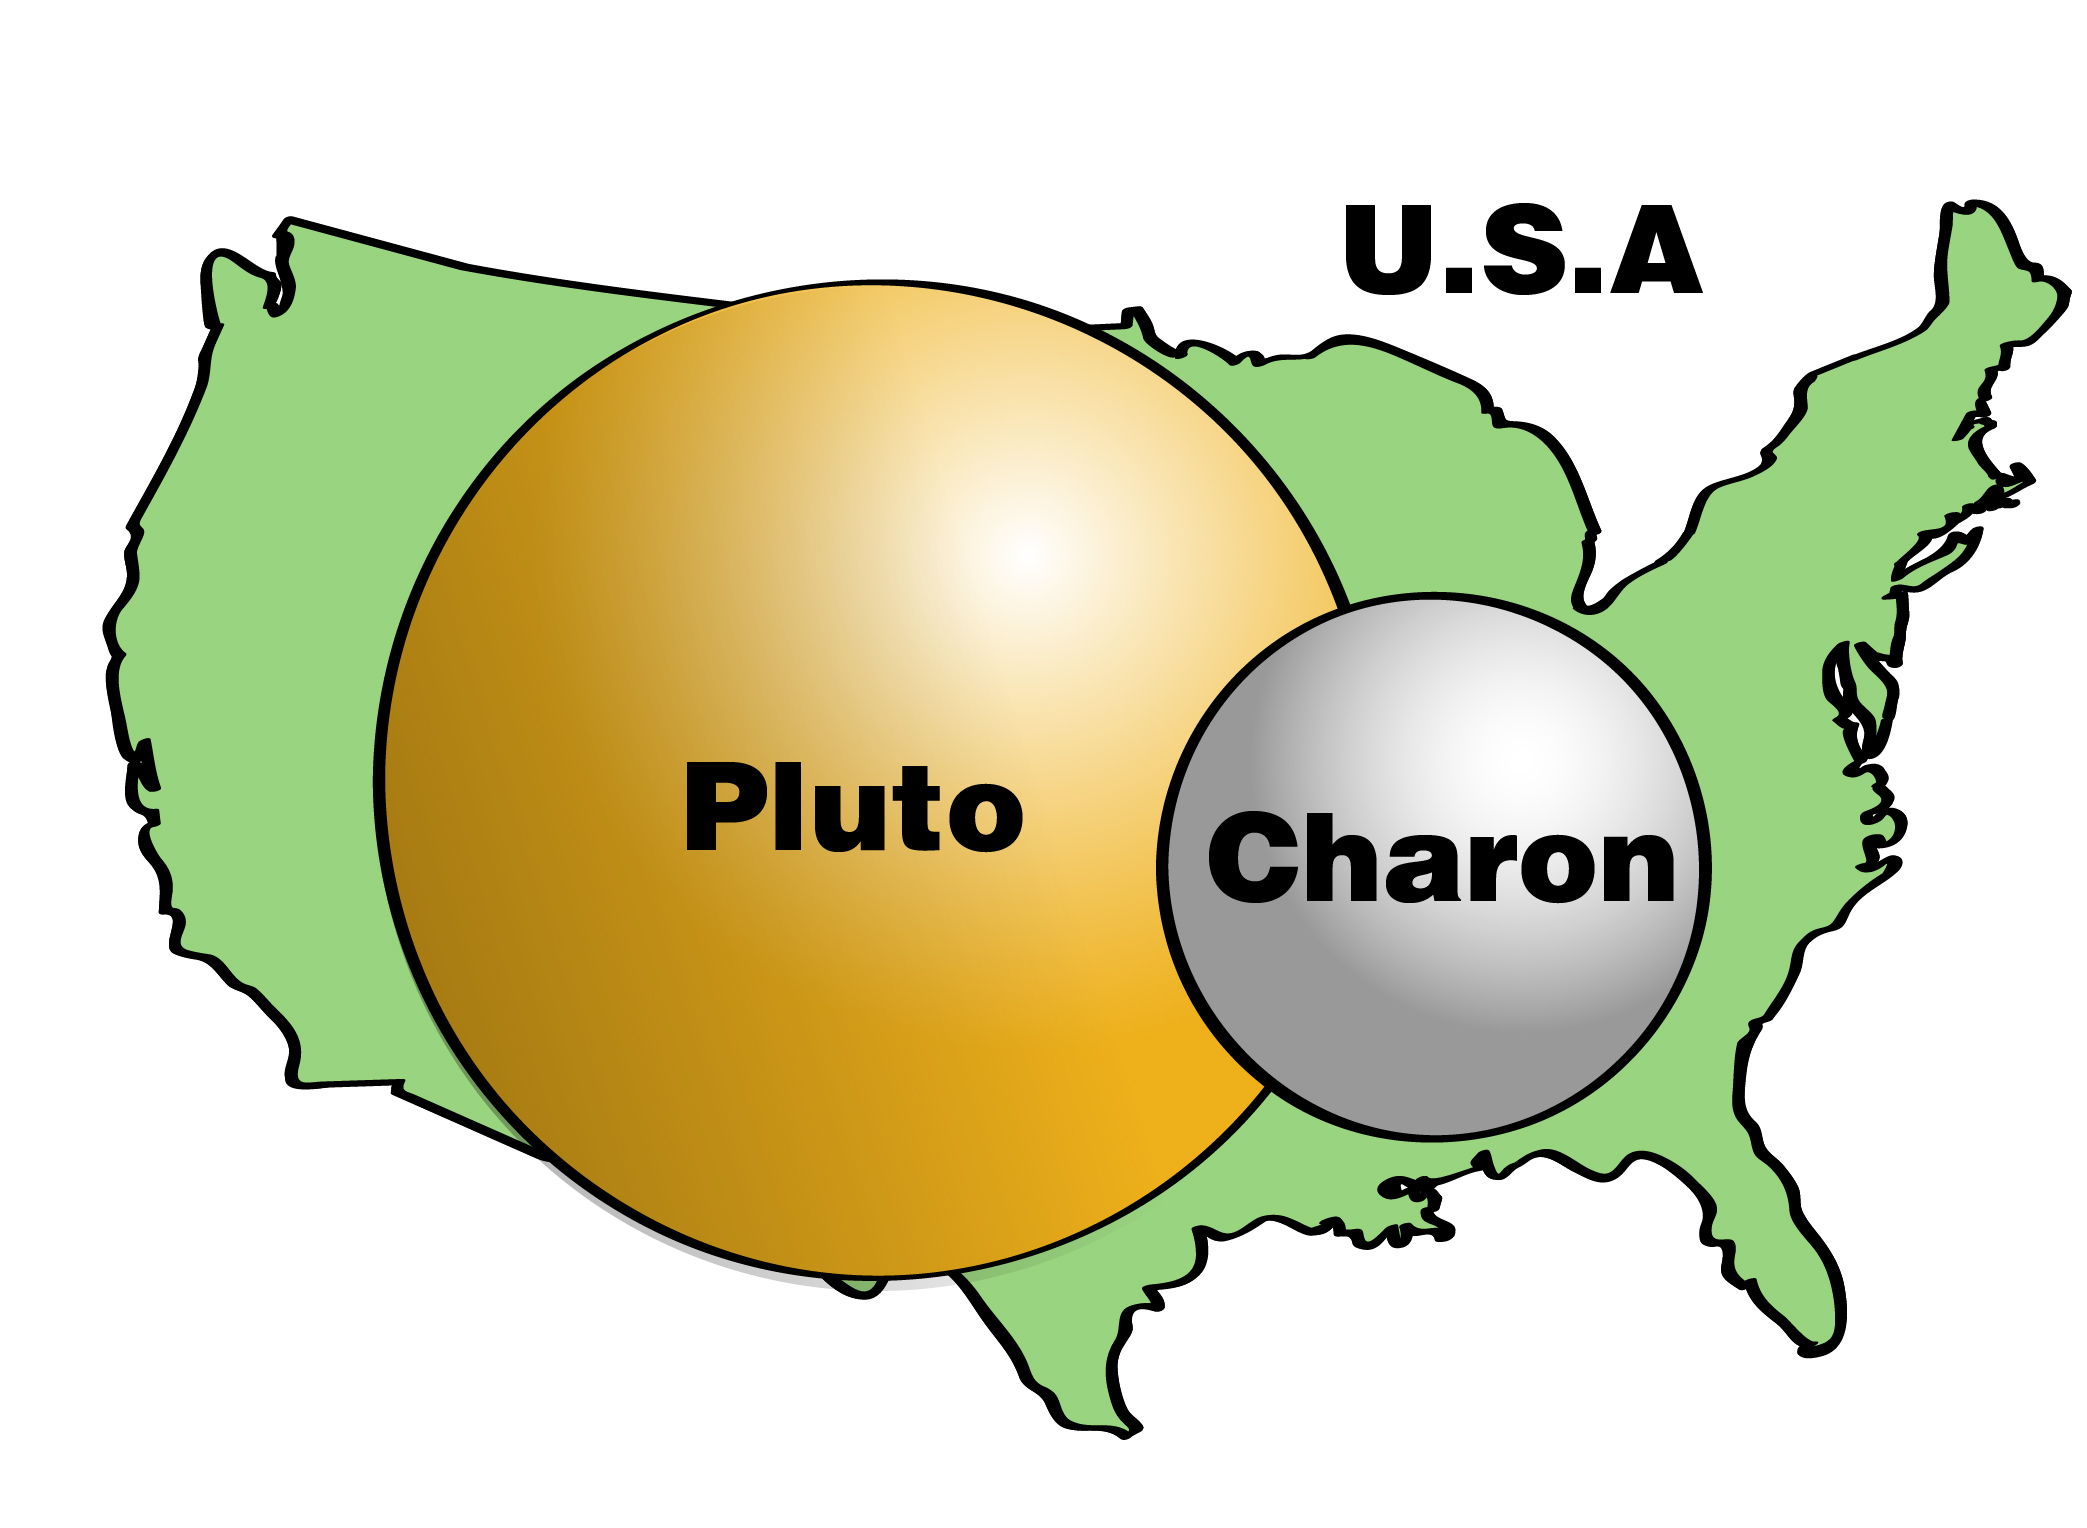 Figure 2: Size of Pluto and Charon compared with America. Credit: NASA